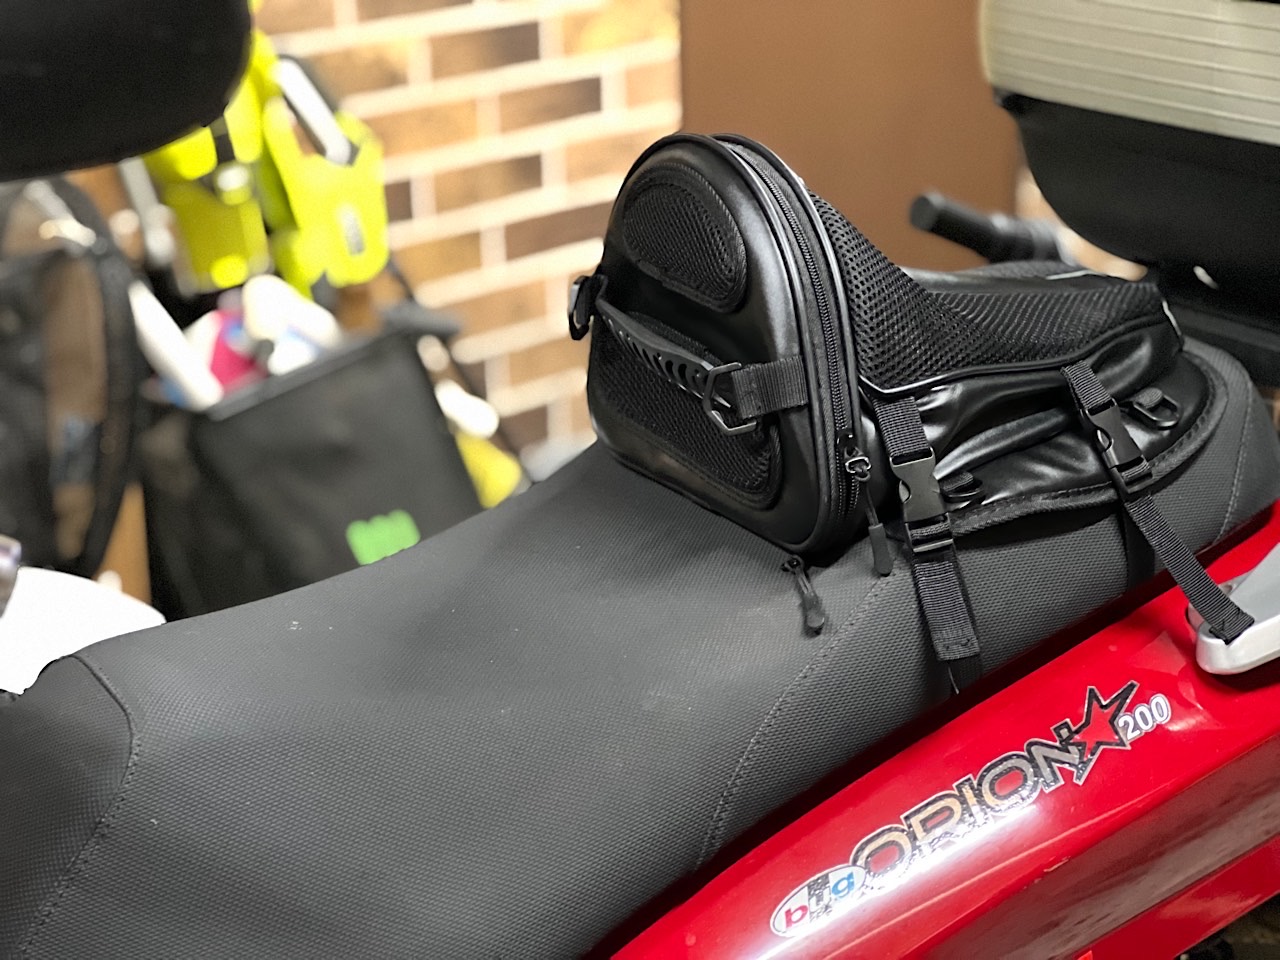 Seat bag as back support